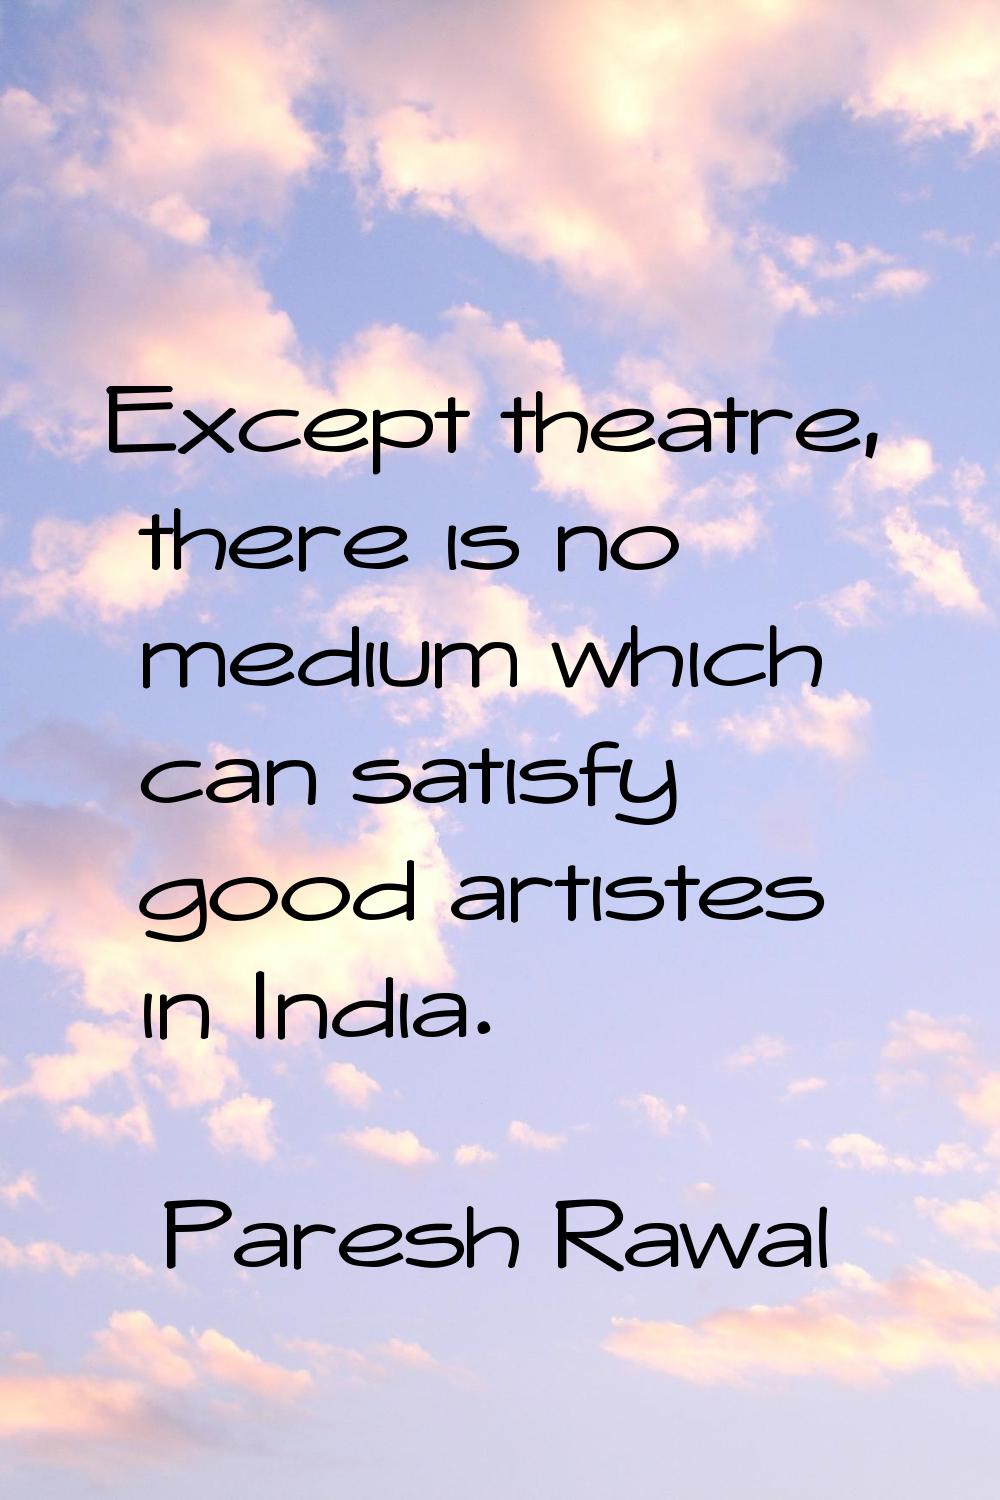 Except theatre, there is no medium which can satisfy good artistes in India.